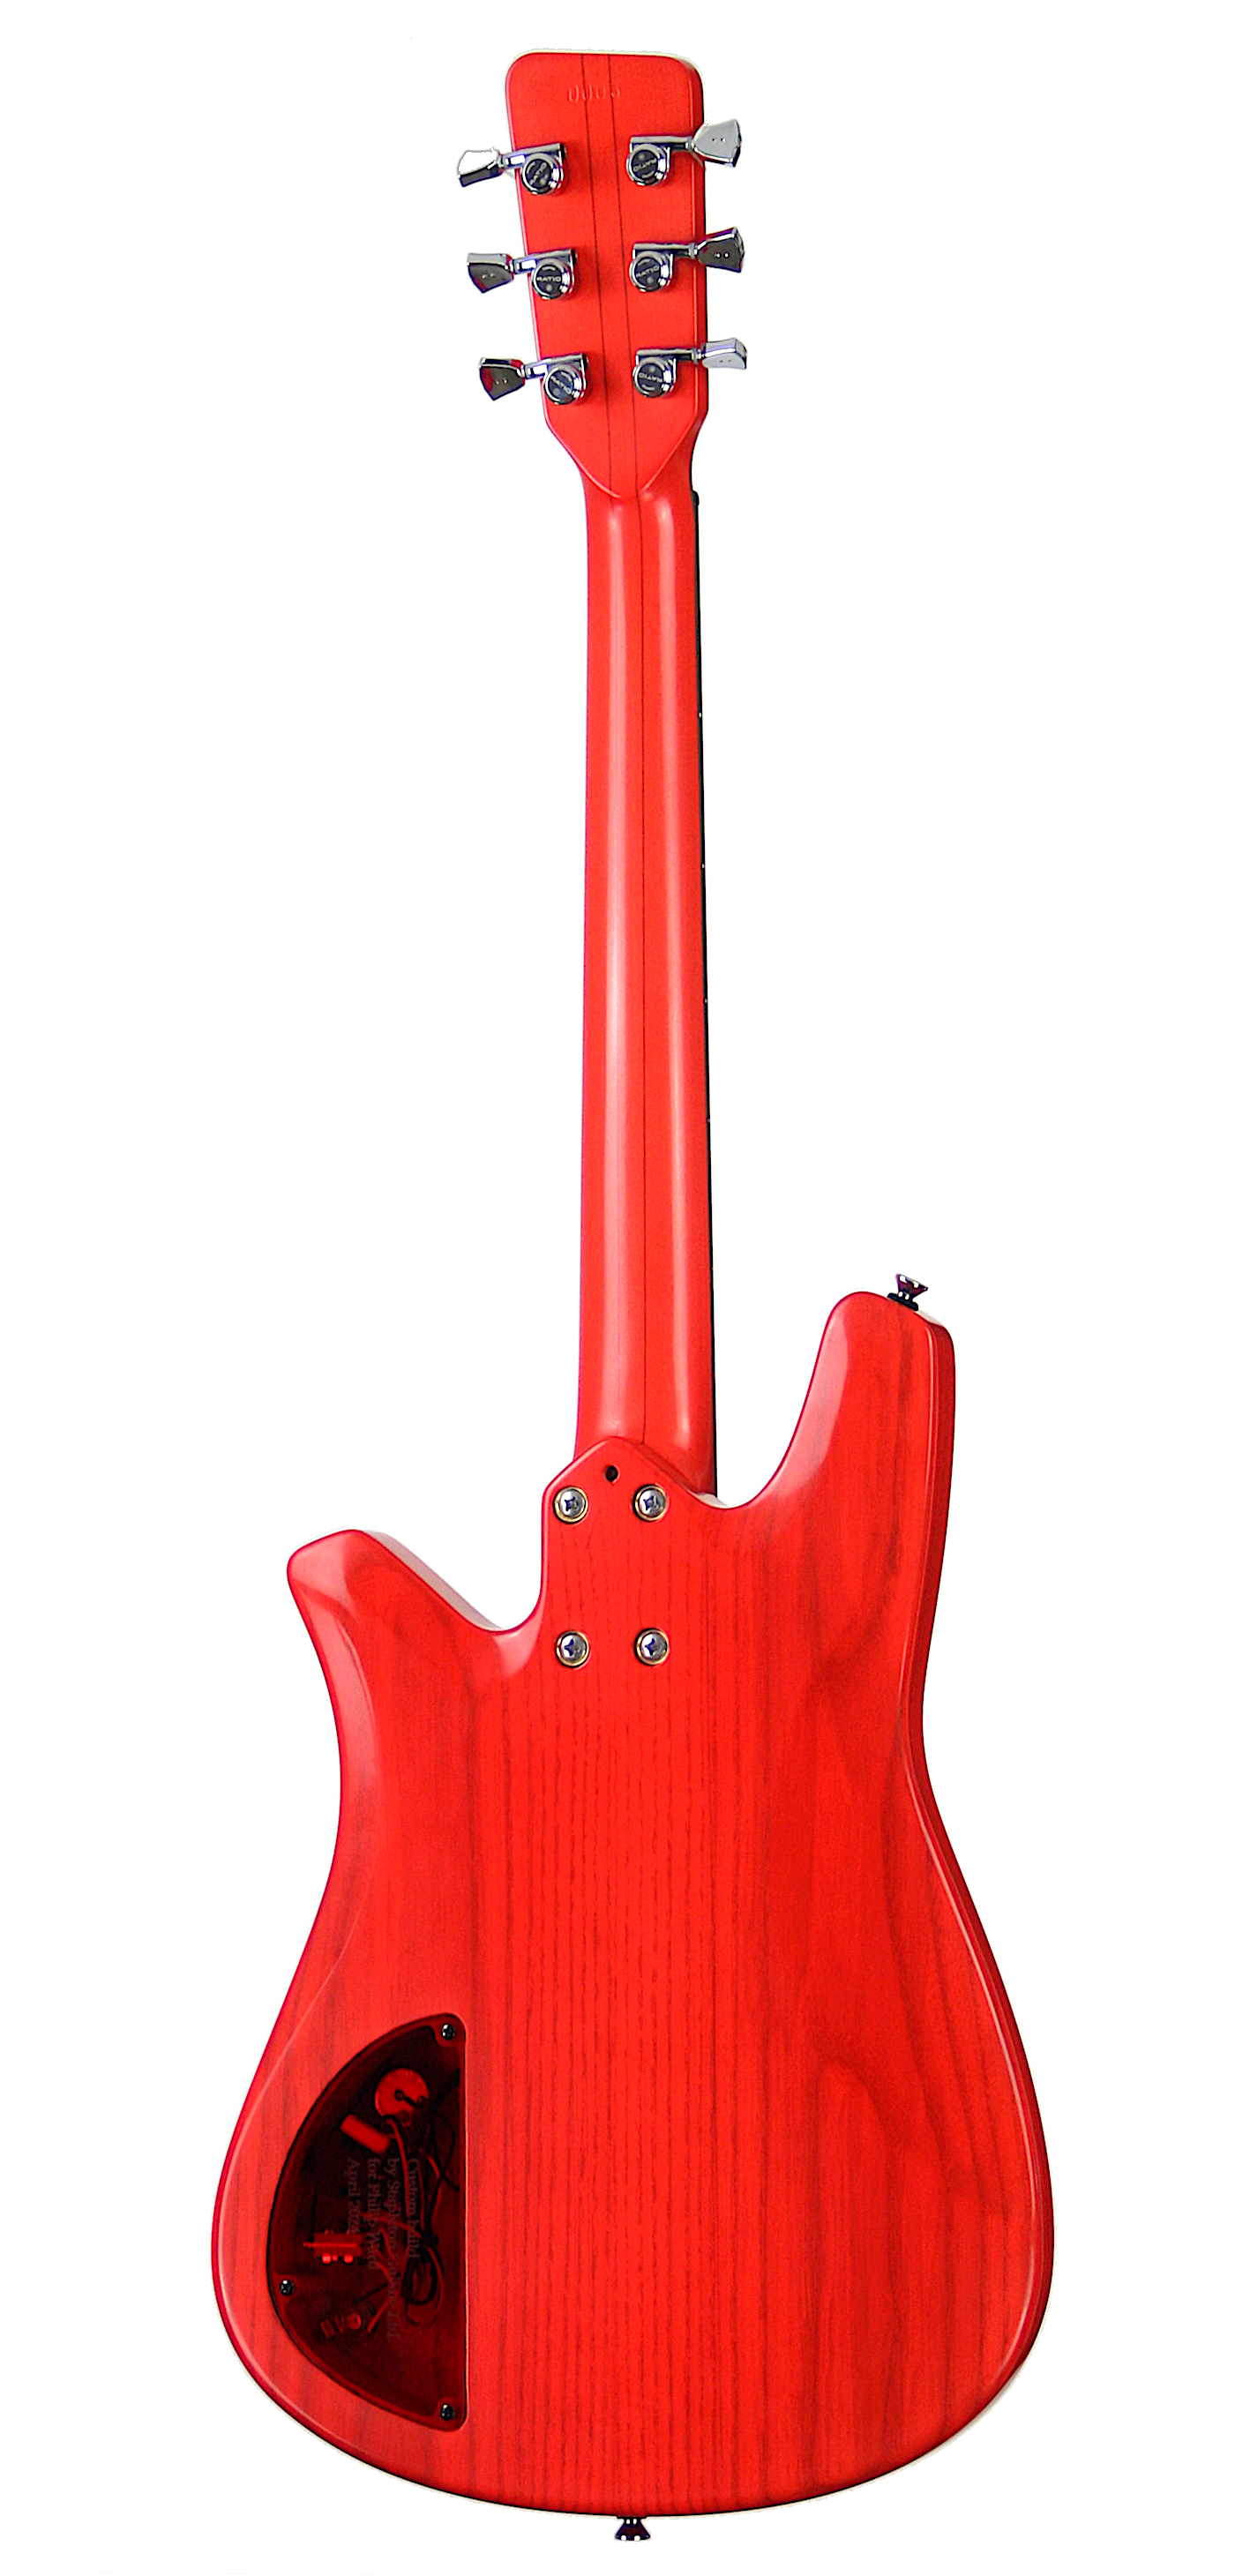 SKYE™ Transparent Red. White Ash body, Maple neck, Indian rosewood fingerboard.